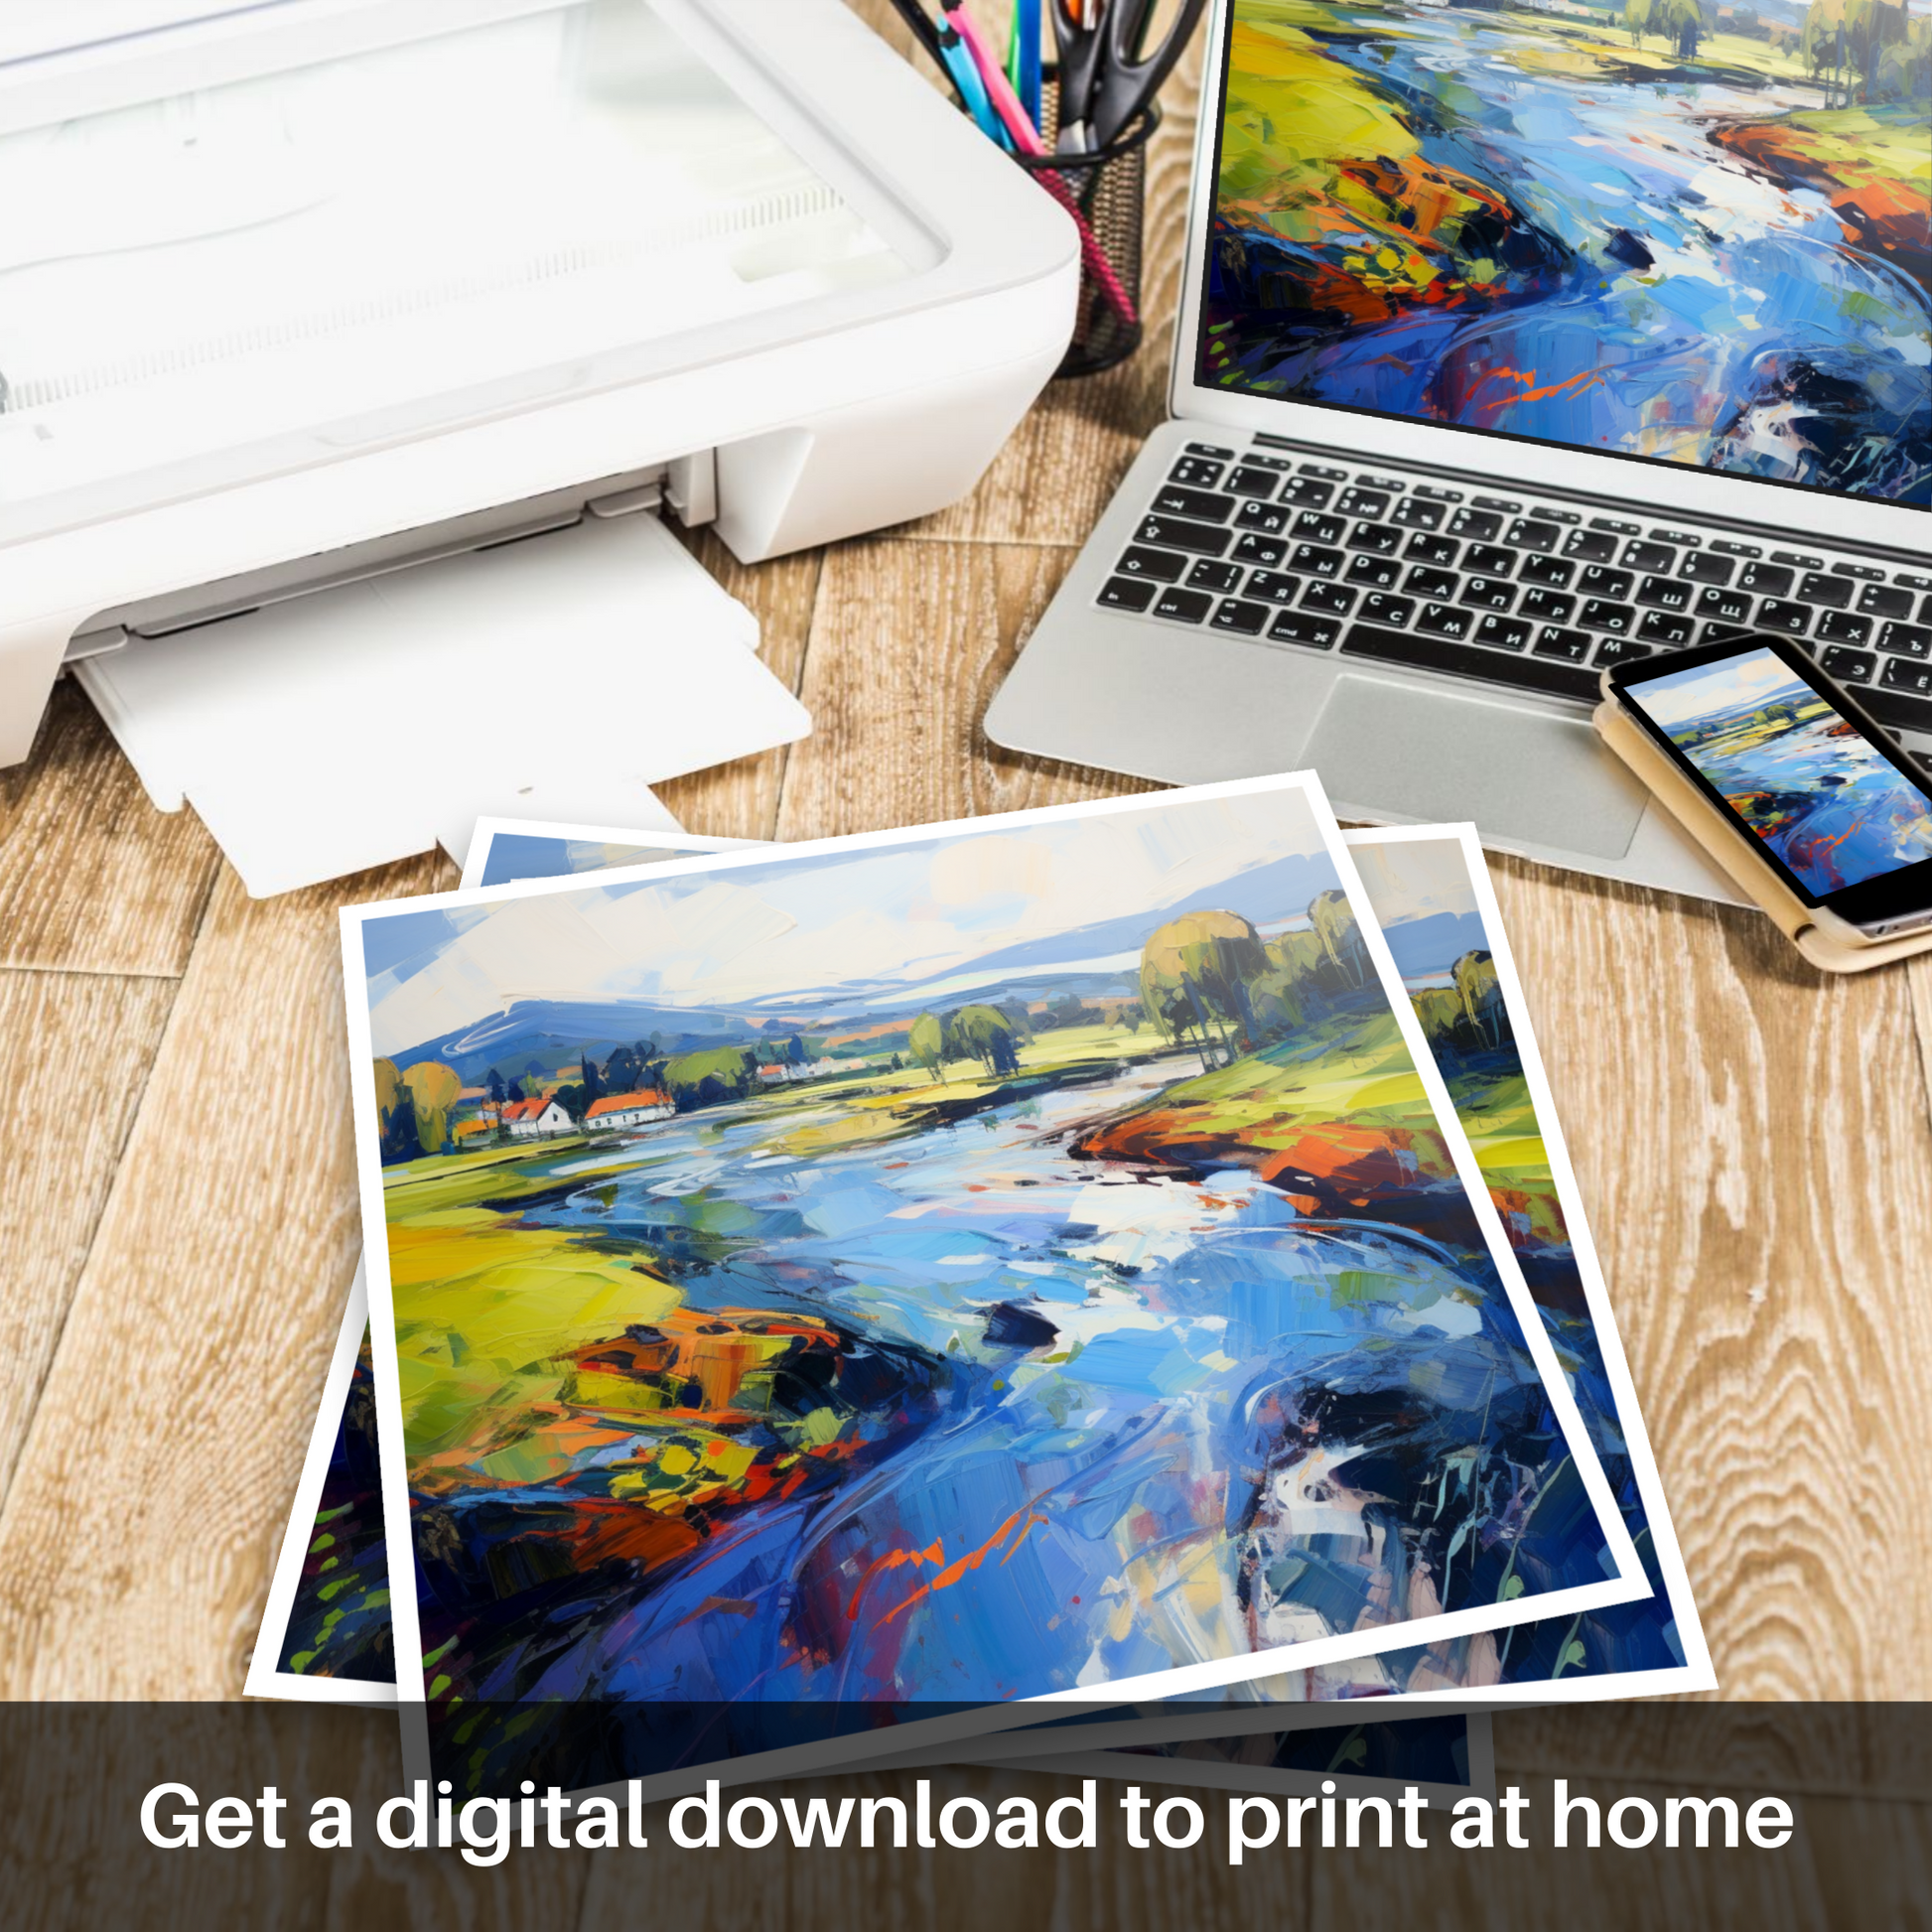 Downloadable and printable picture of River Leven, West Dunbartonshire